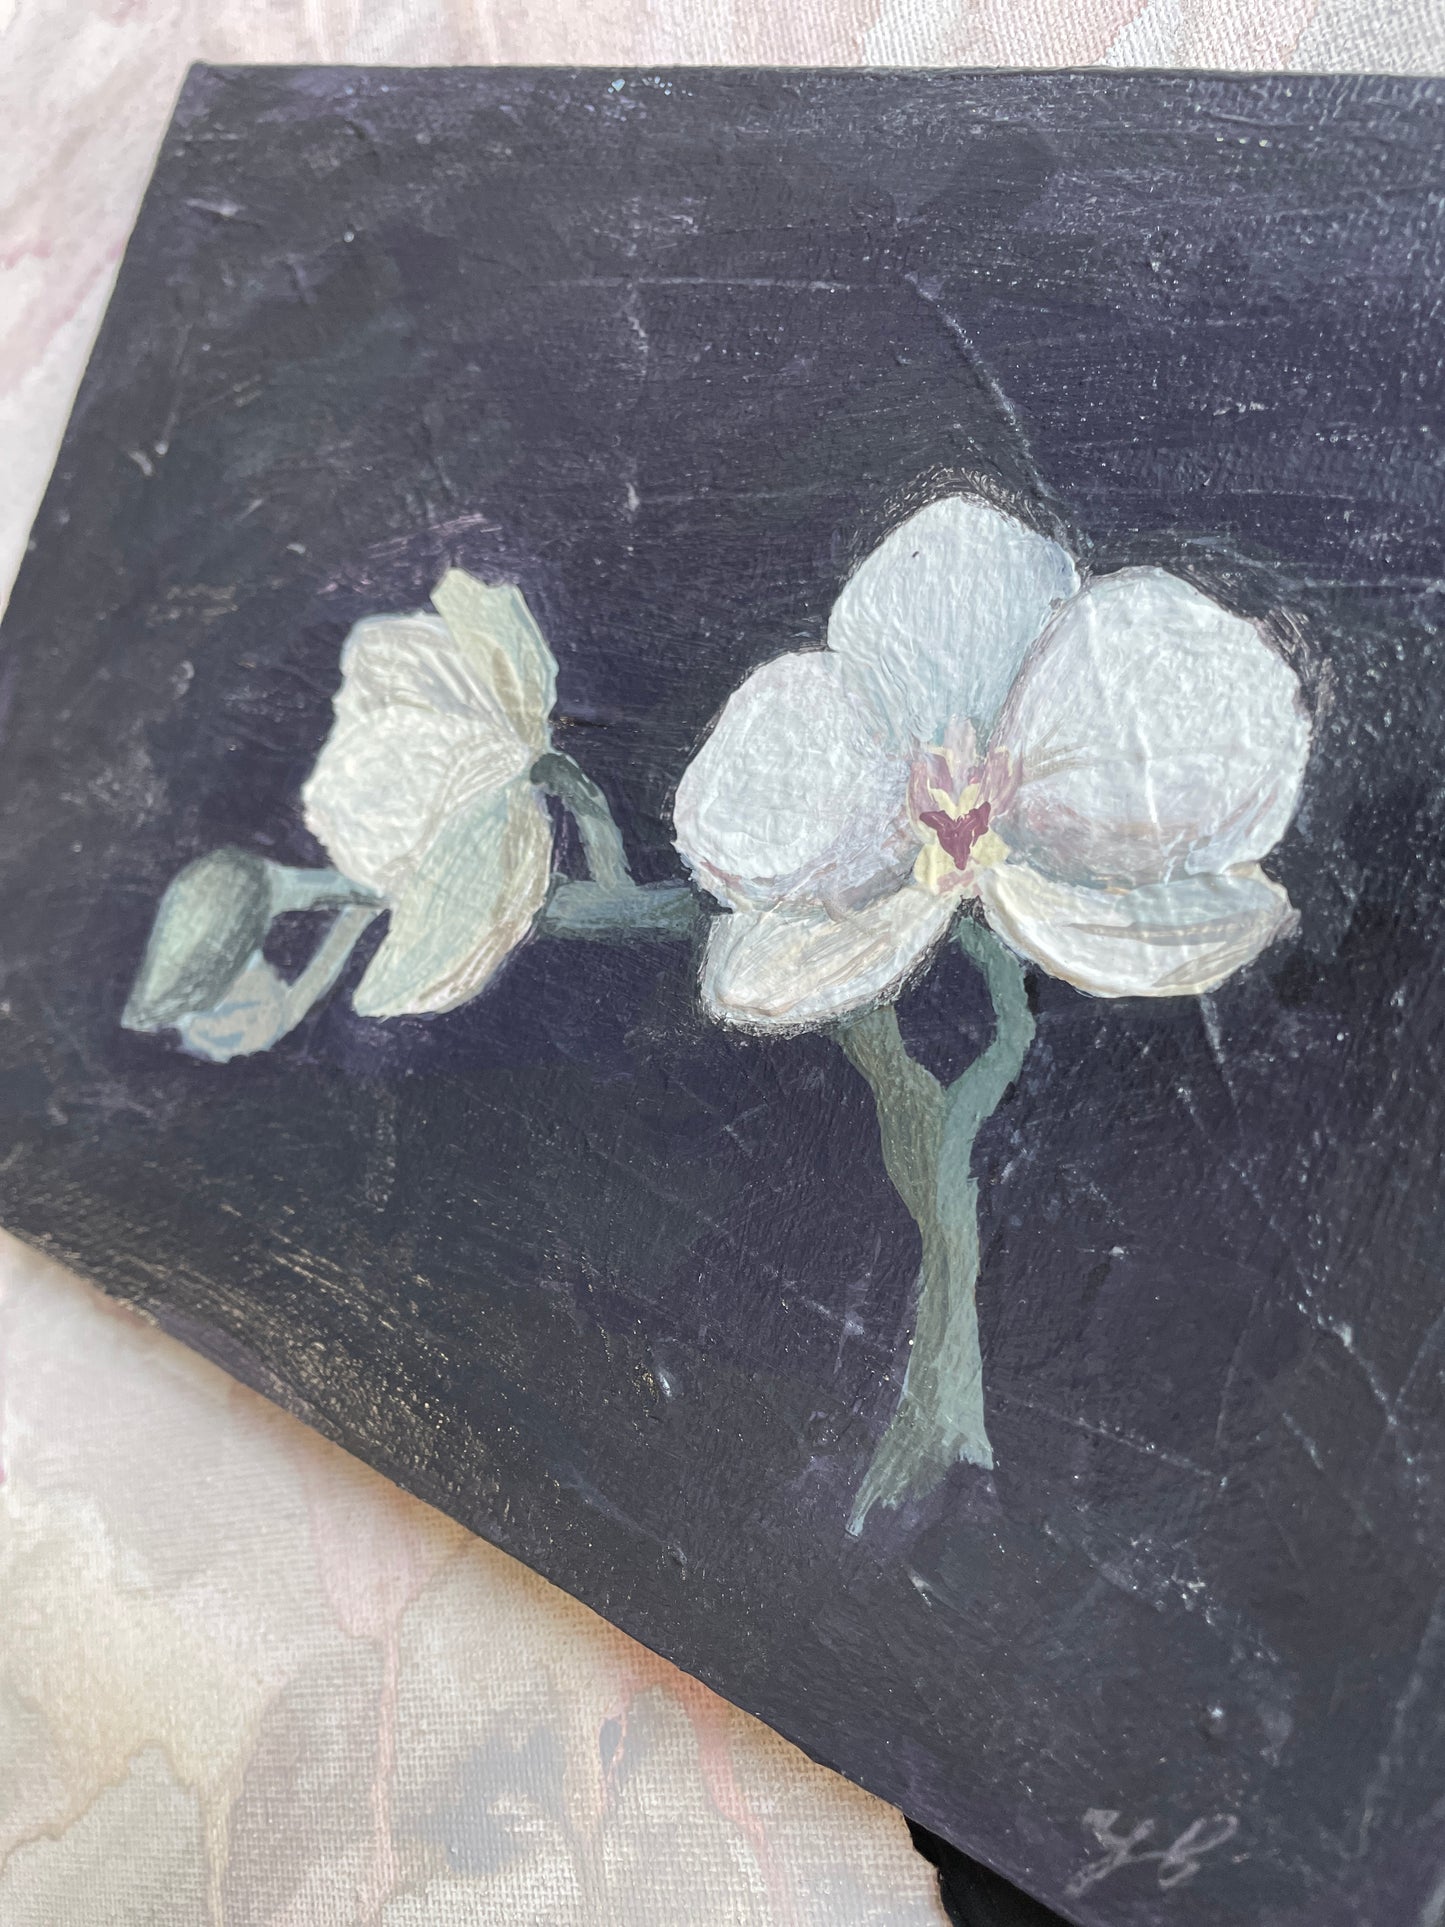 X SOLD The orchid study. Acrylics on stretched canvas.